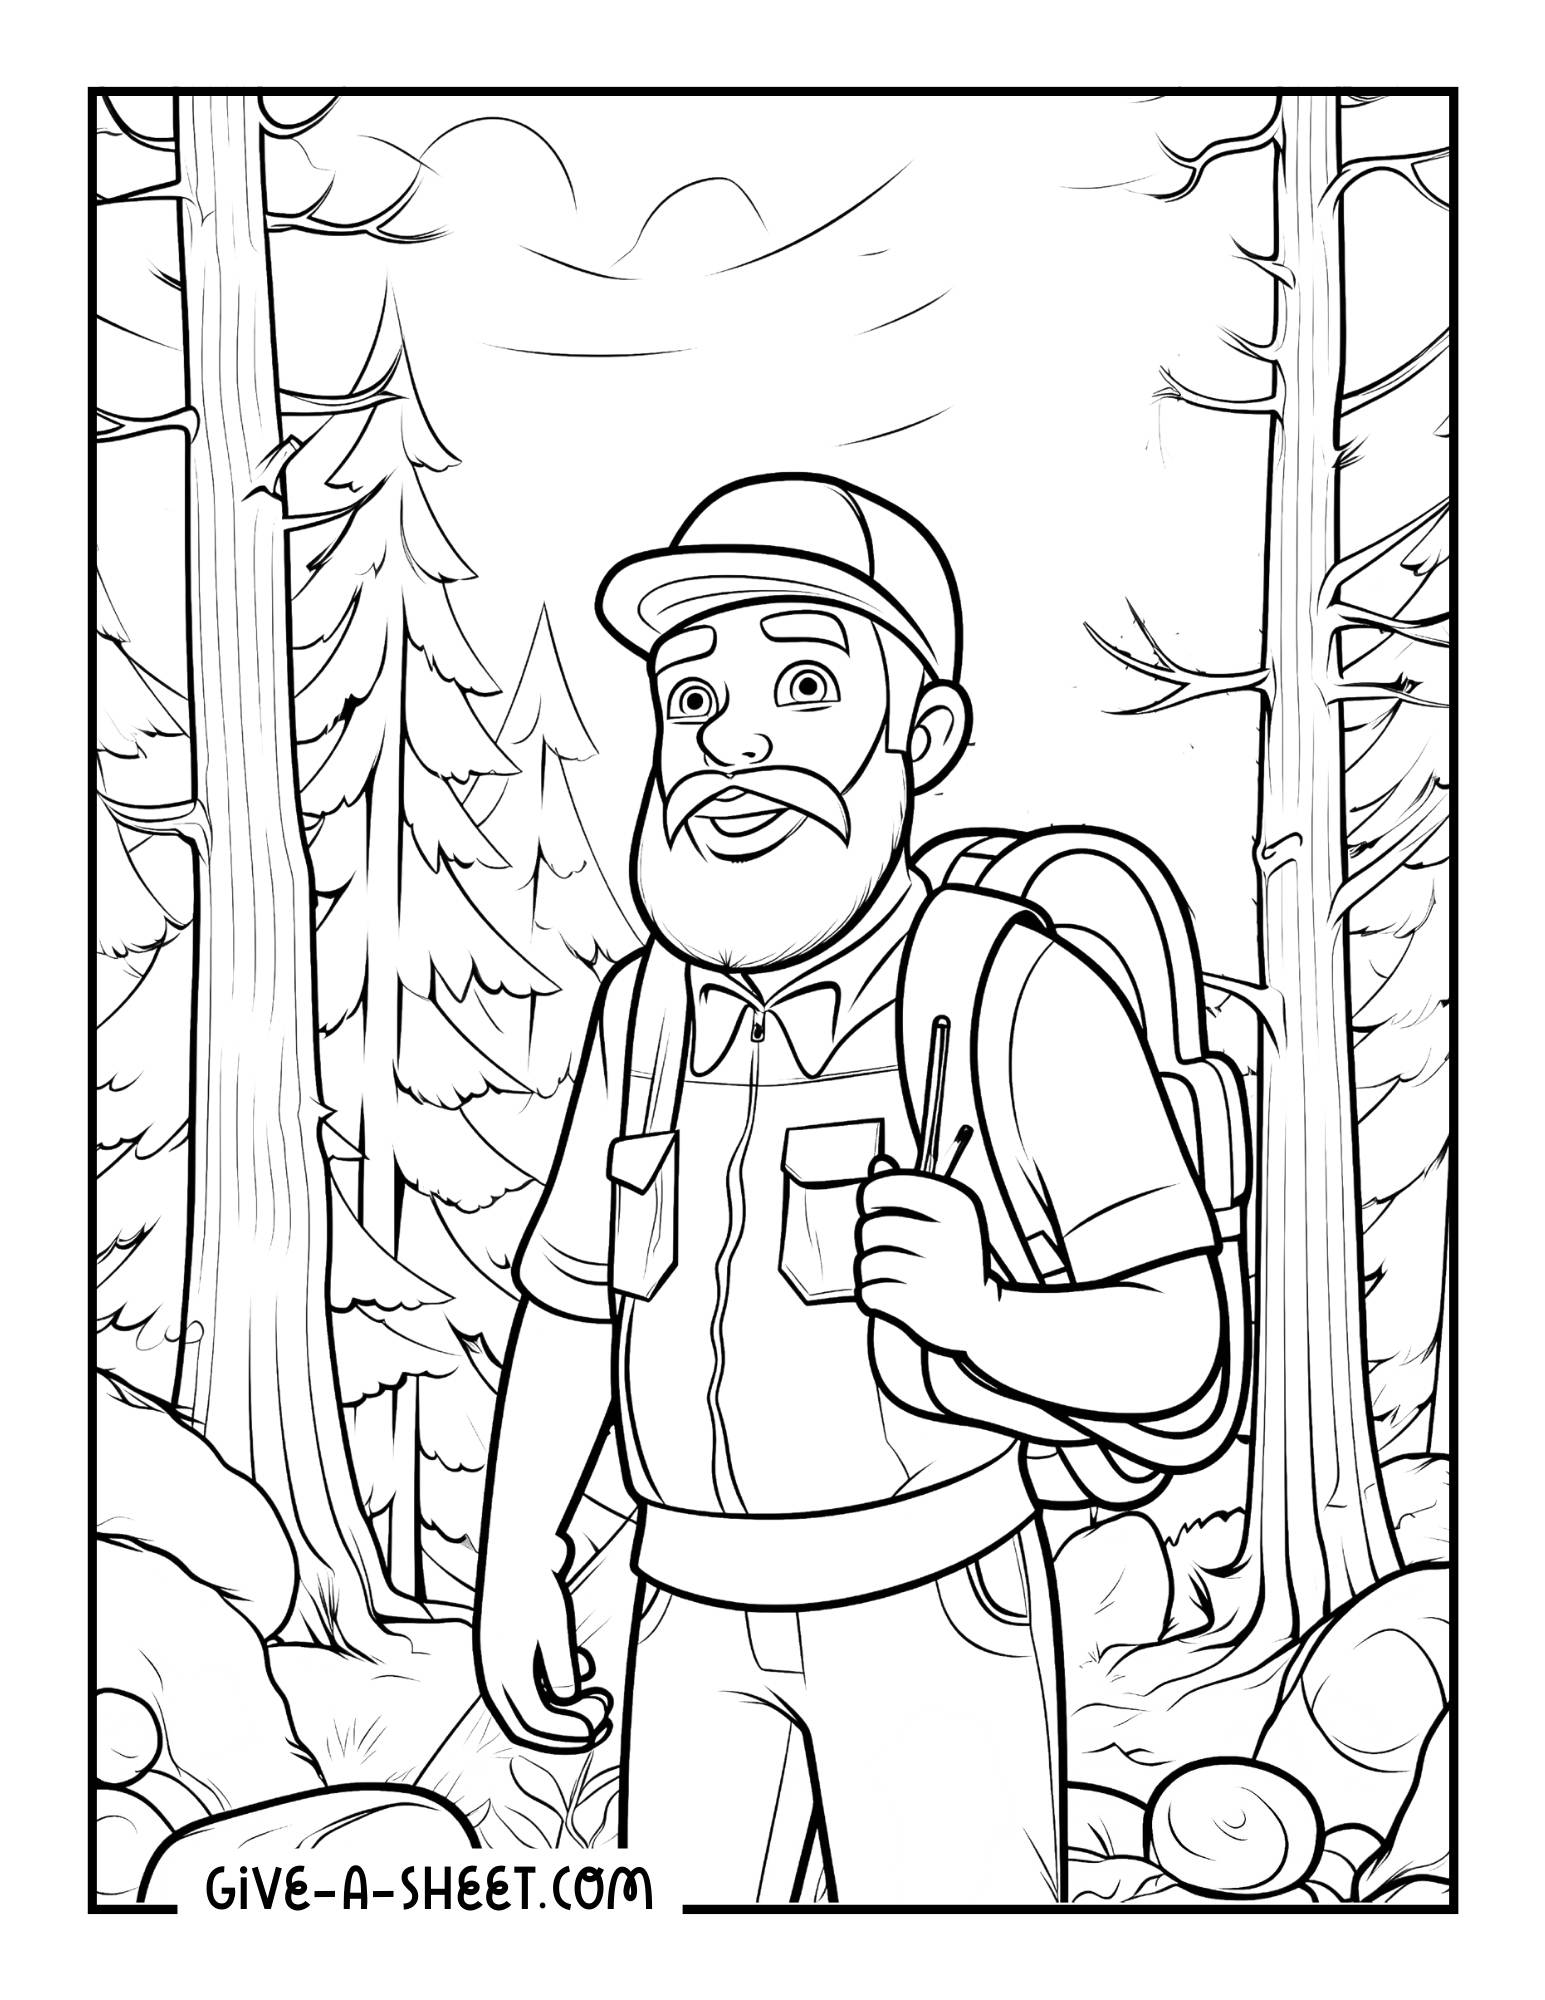 Hiker hiking evergreen forest coloring sheet for adults.